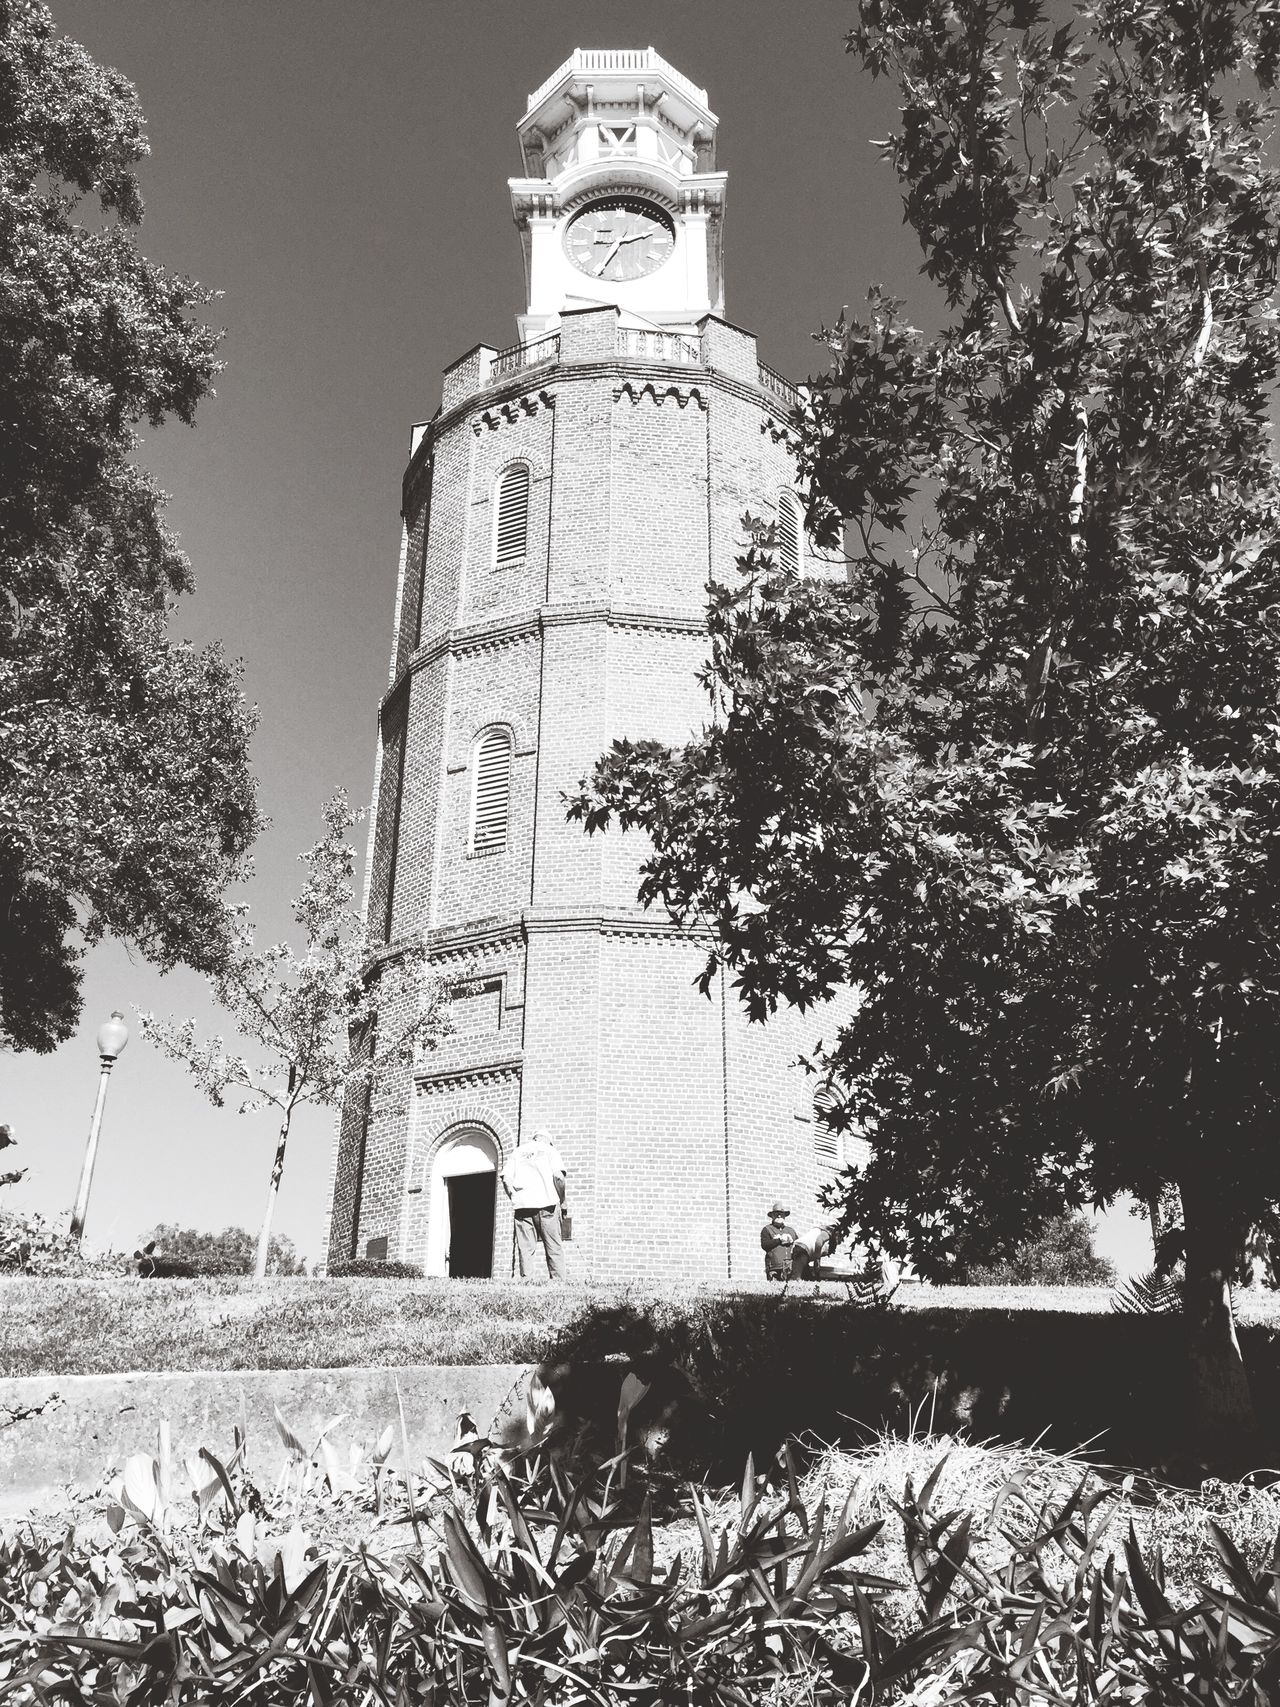 The historic Rome Clock Tower